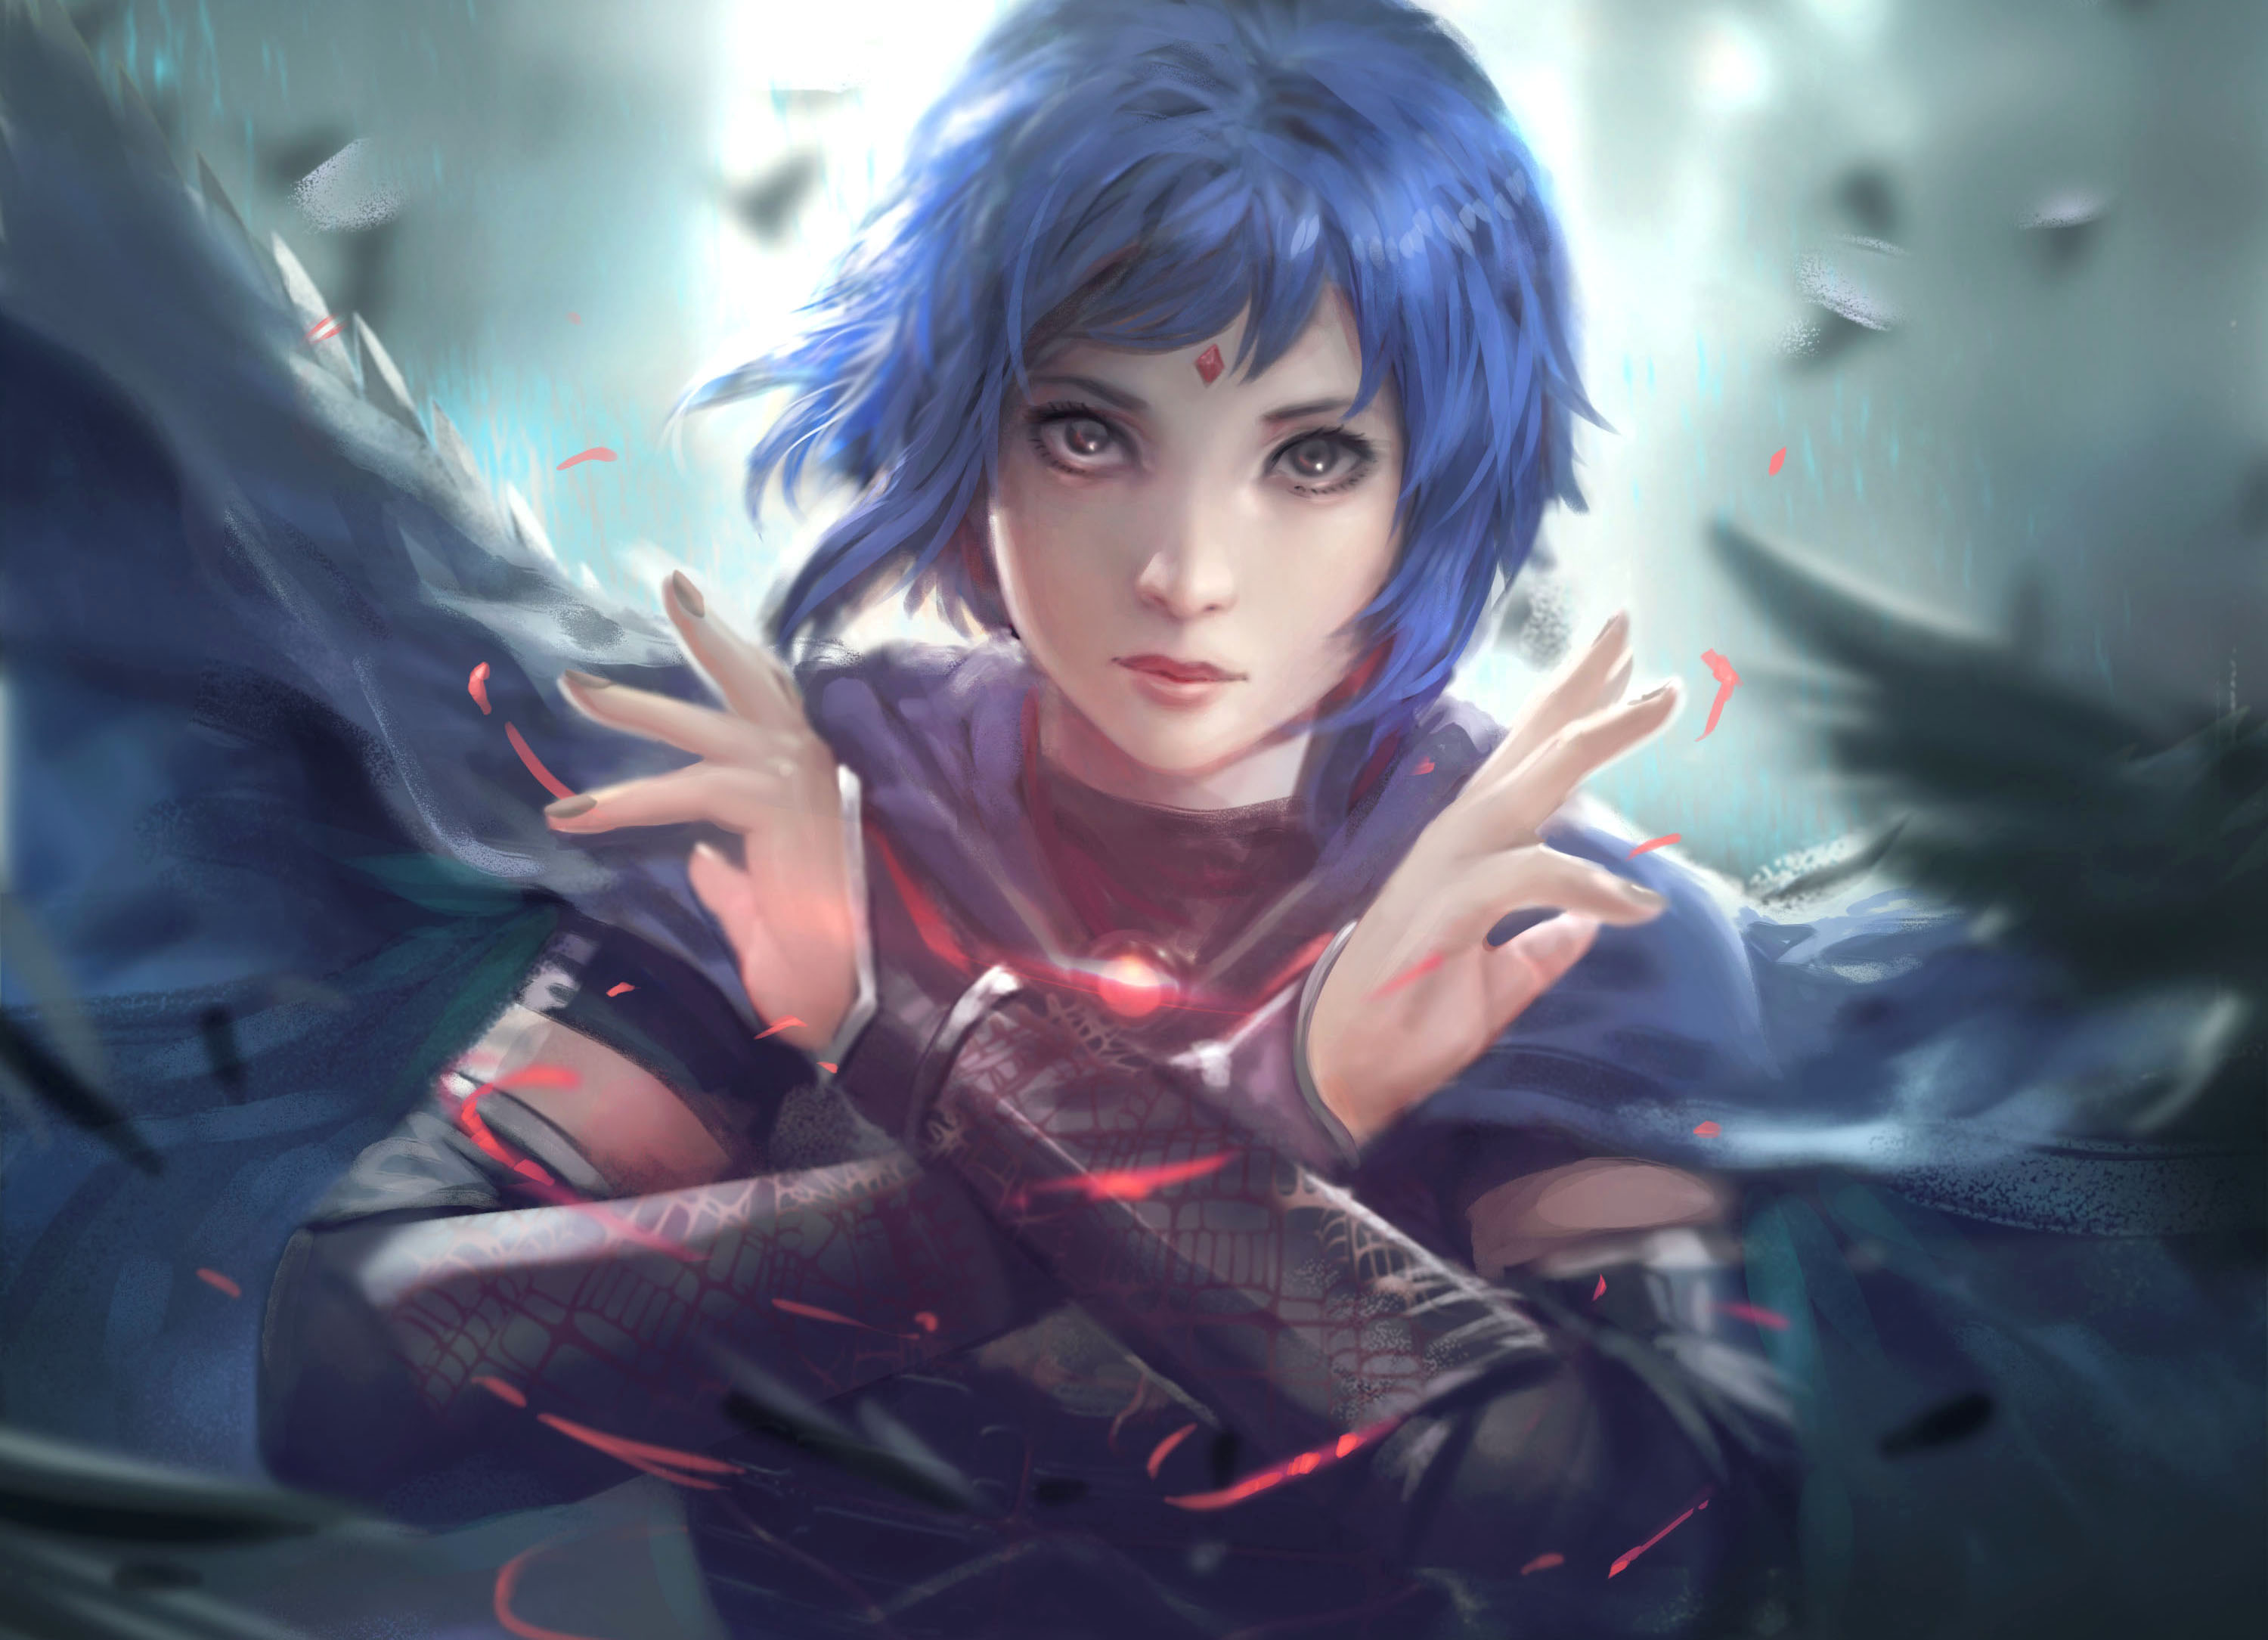 8. Anime girl with blue hair and short hair - wide 4